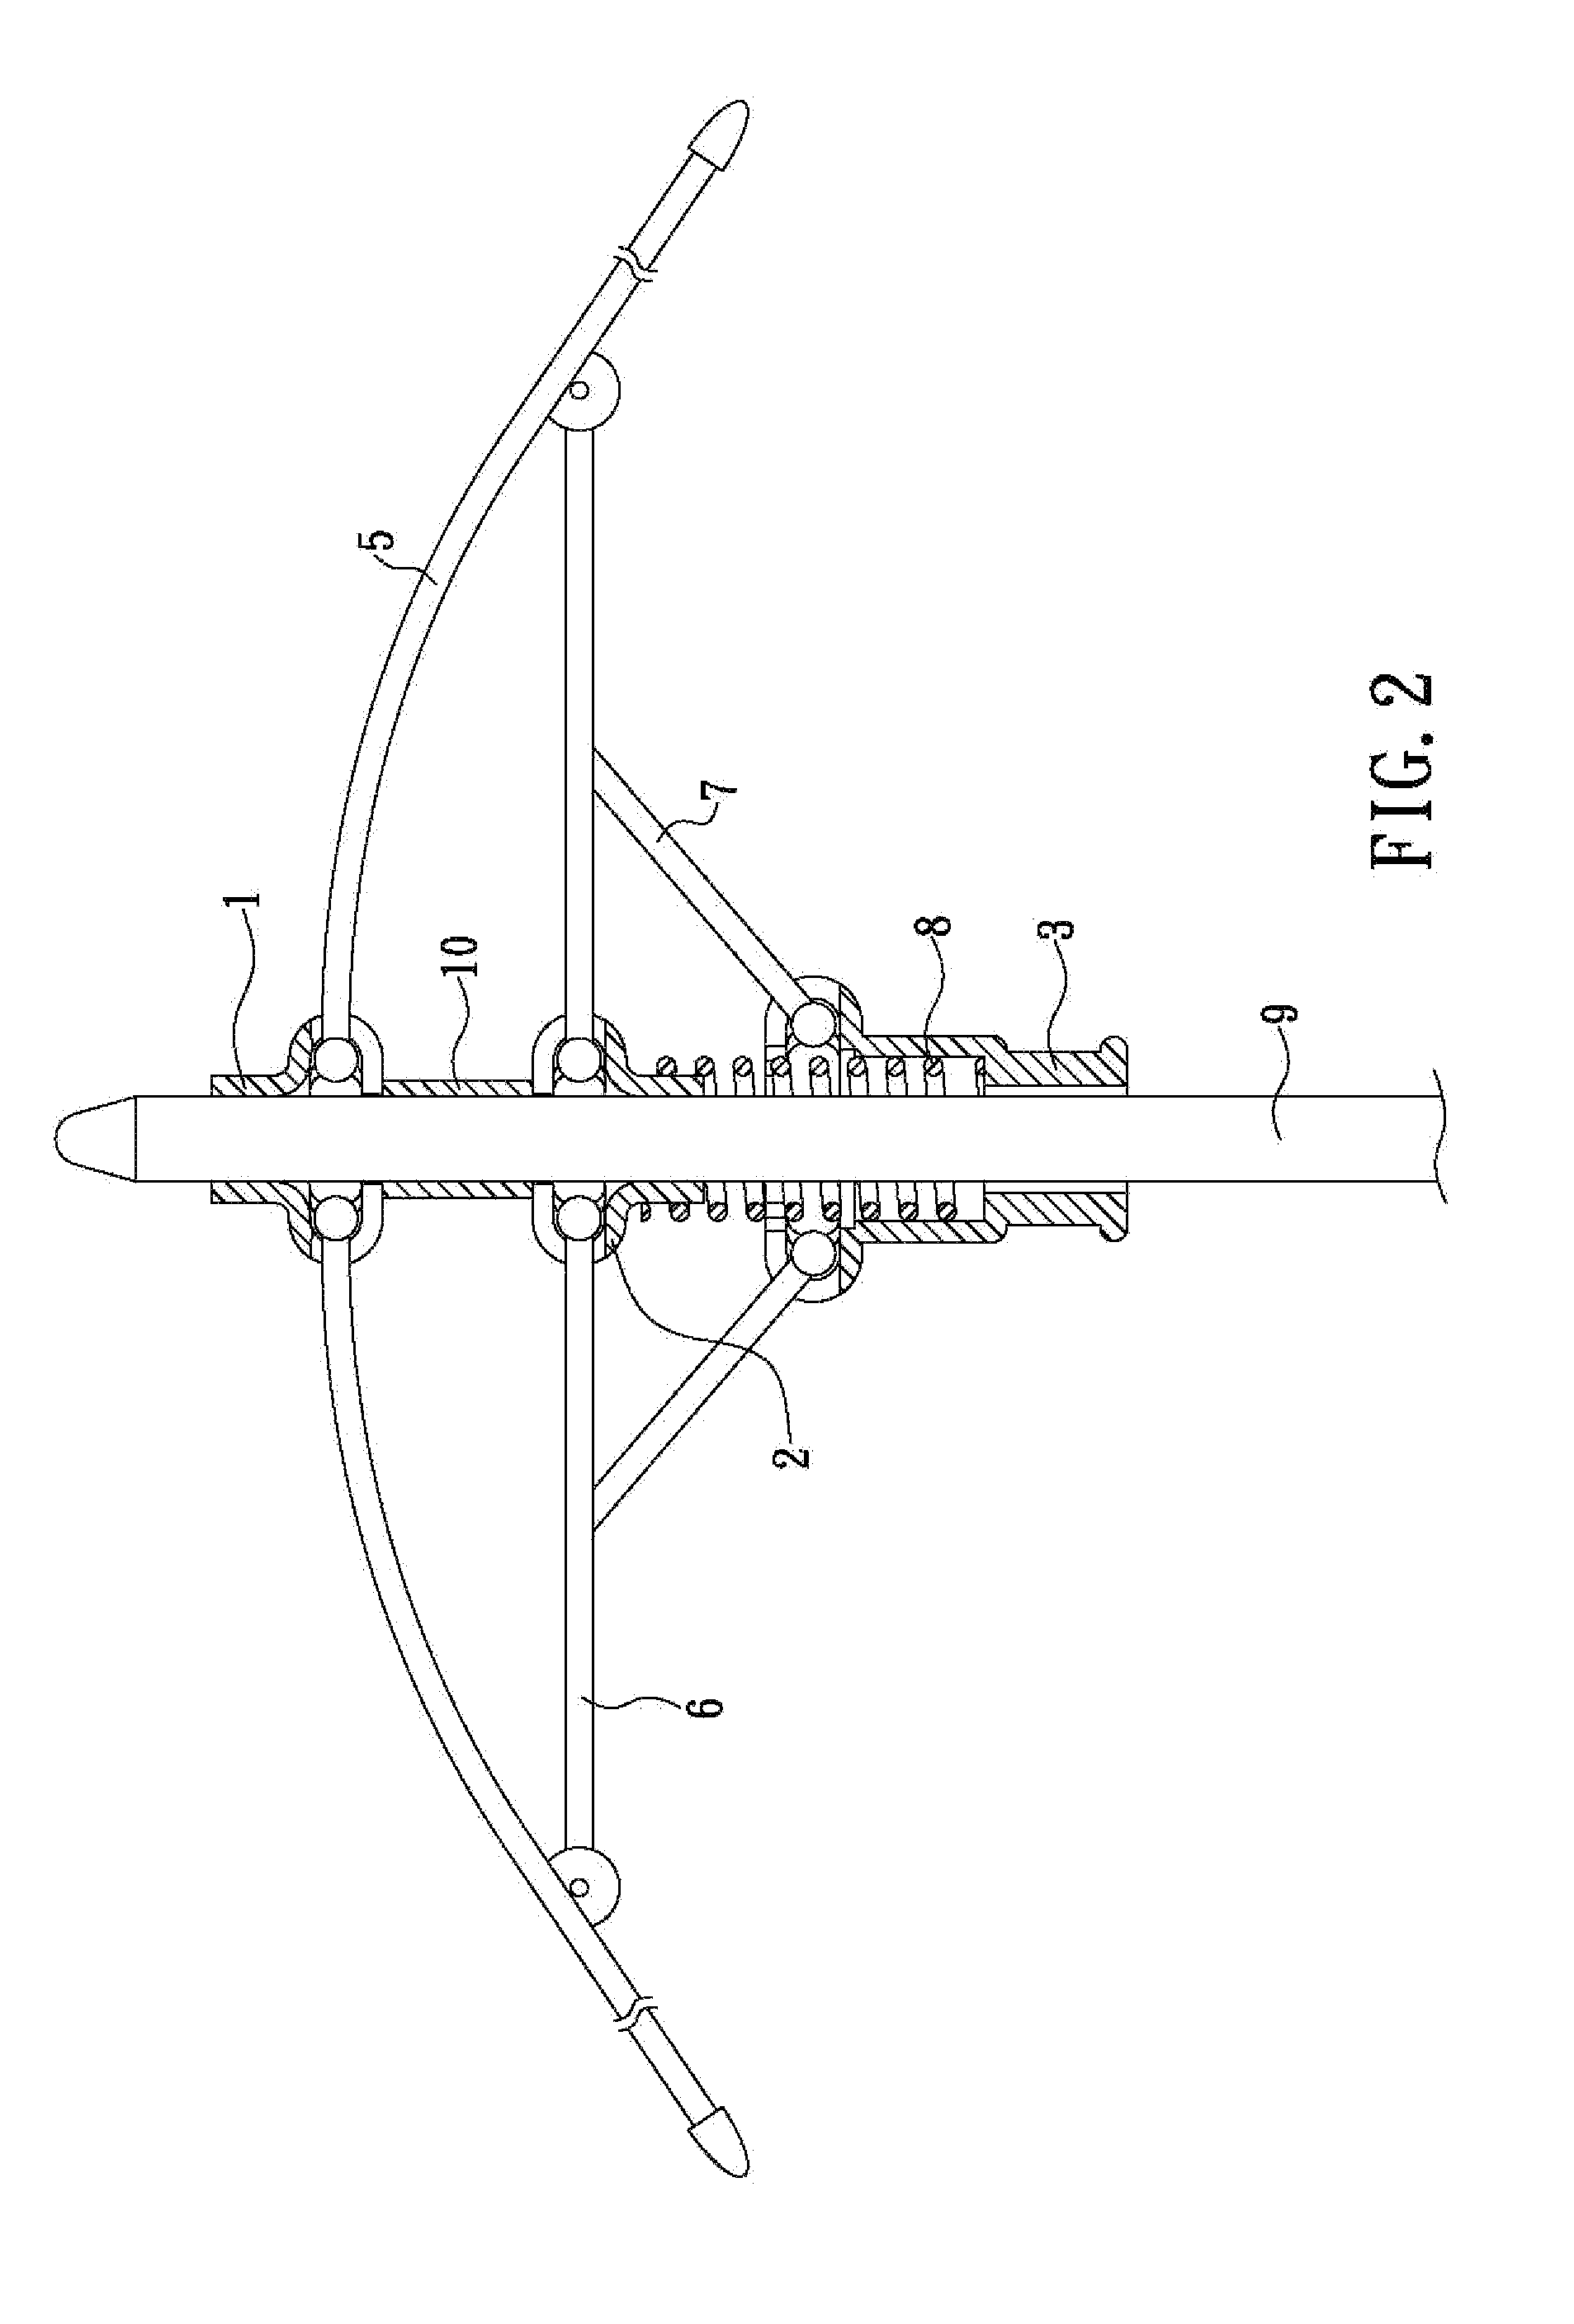 Umbrella structure having at least one mushroom-shaped hub for enabling rapid assembly of main rod and supporting members